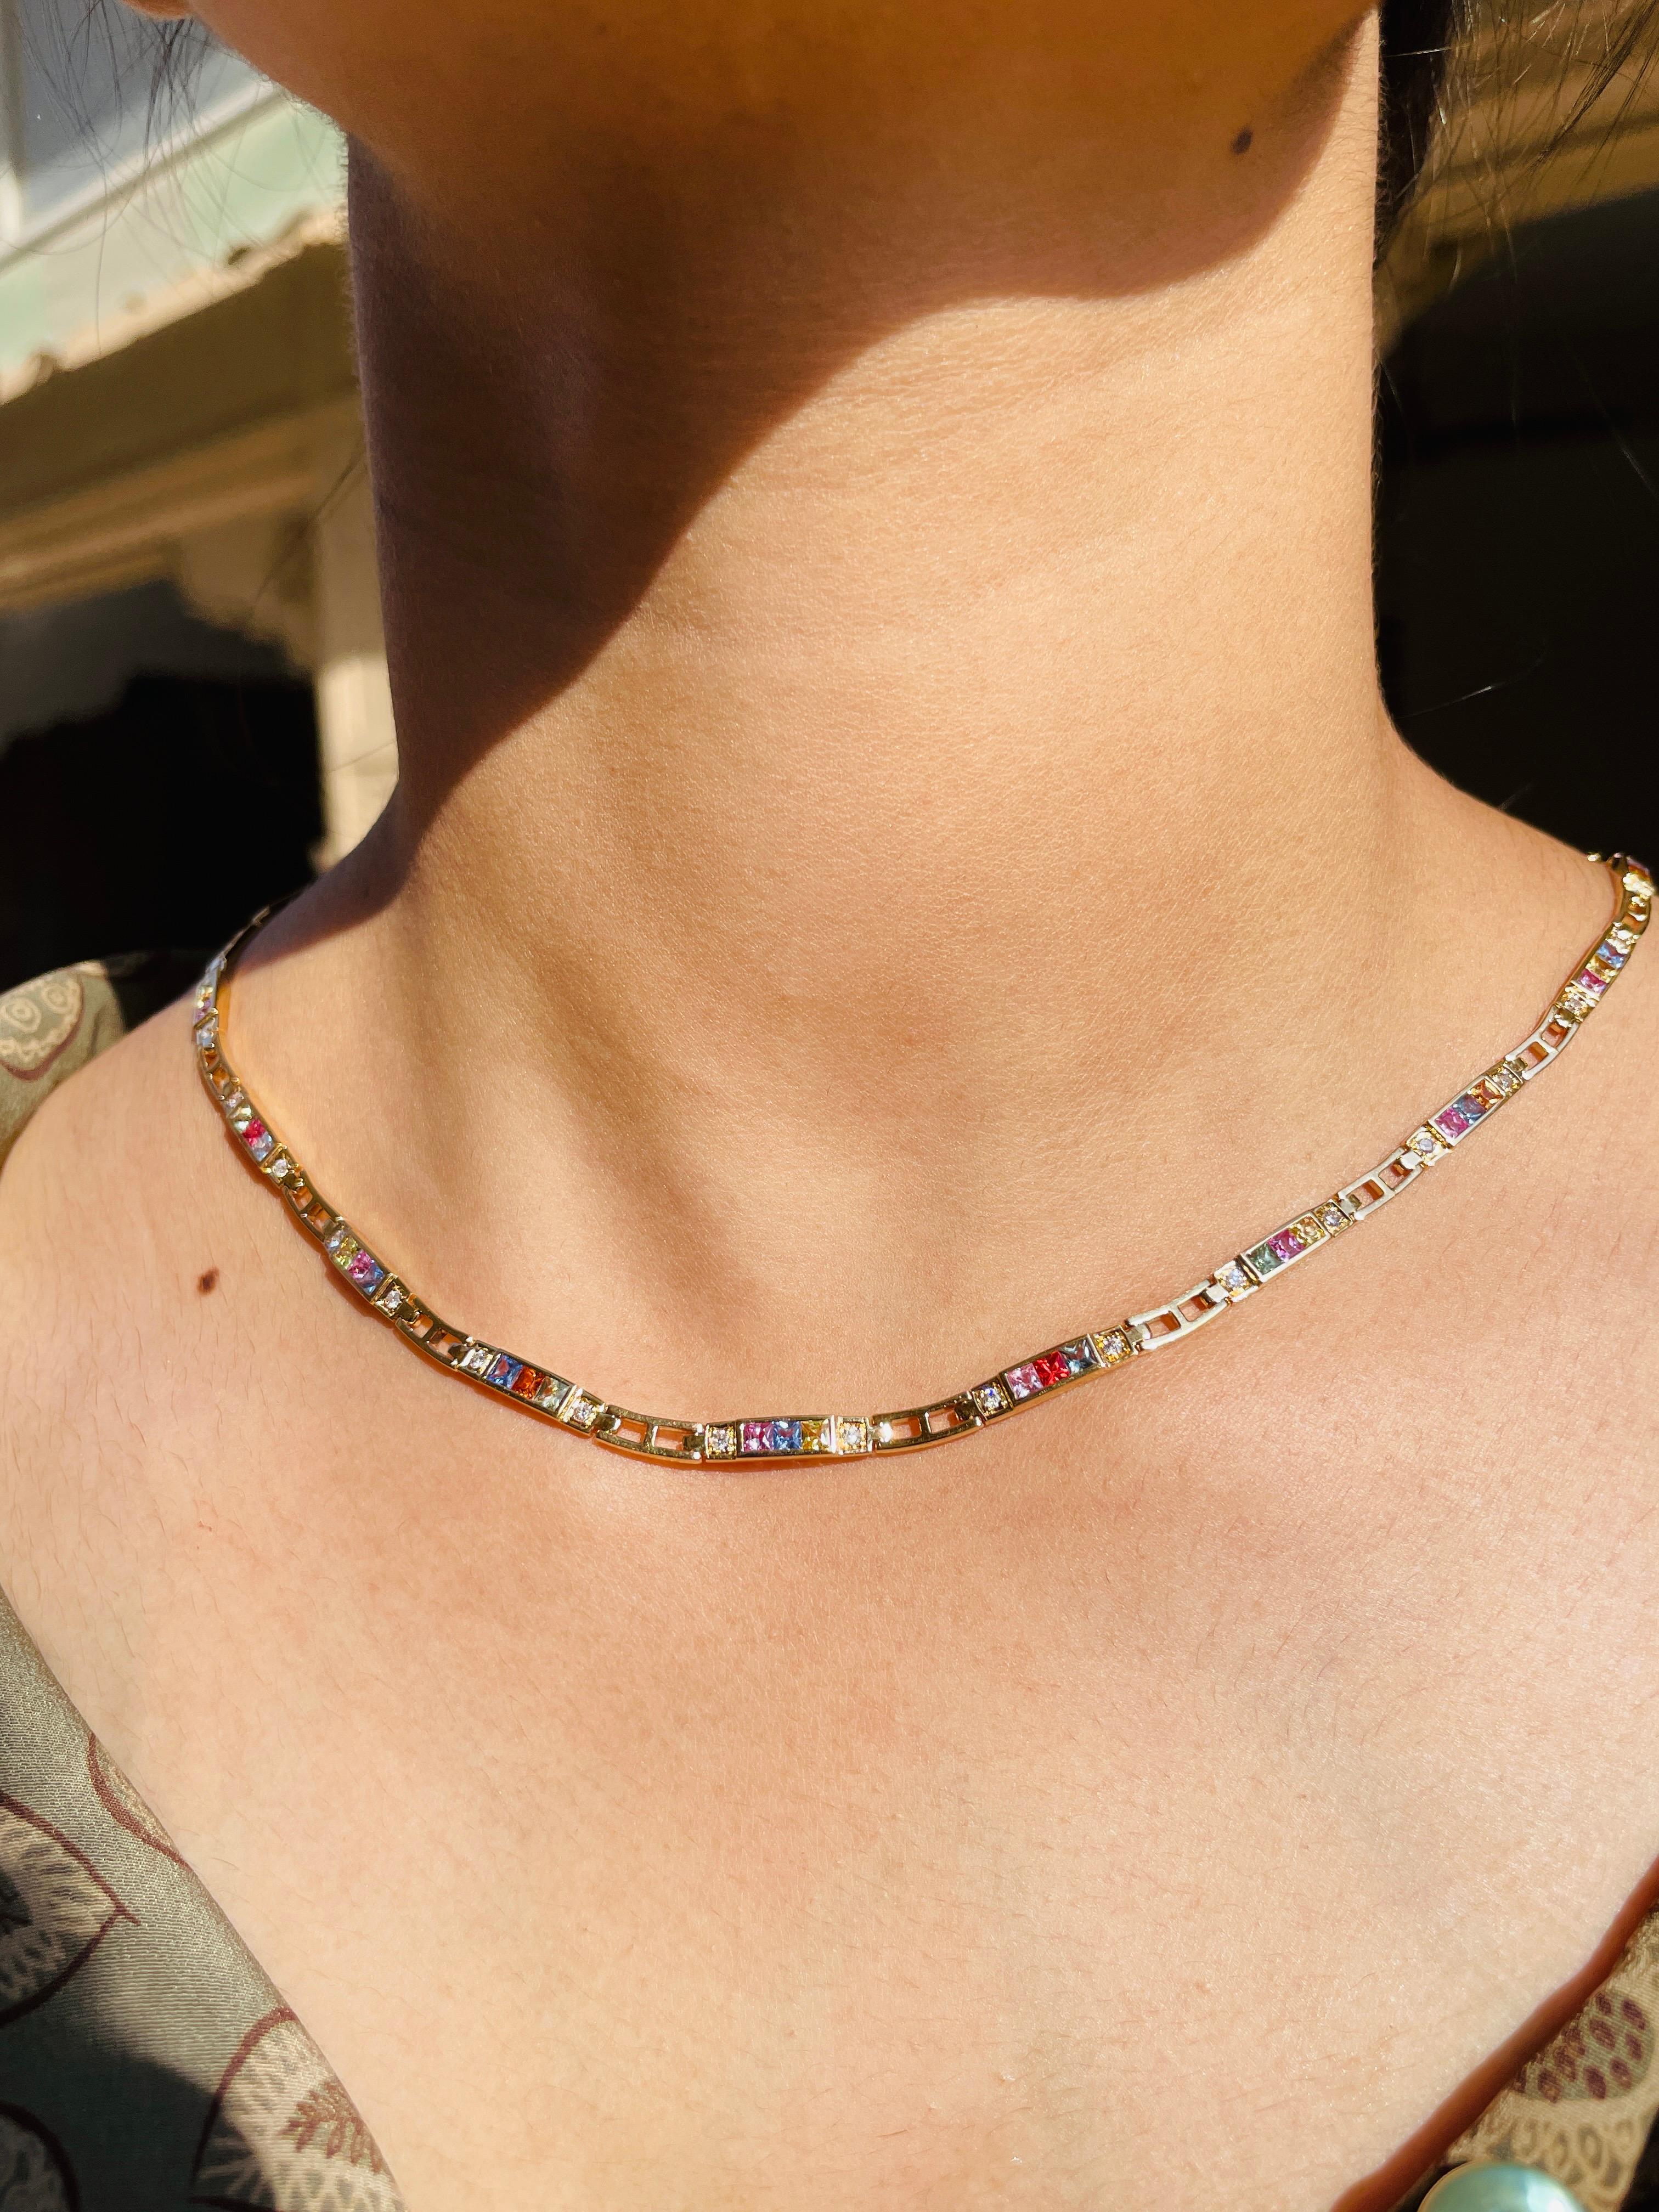 Multi Sapphire Necklace in 18K Gold studded with square cut sapphire pieces and diamonds.
Accessorize your look with this elegant sapphire beaded necklace. This stunning piece of jewelry instantly elevates a casual look or dressy outfit. Comfortable